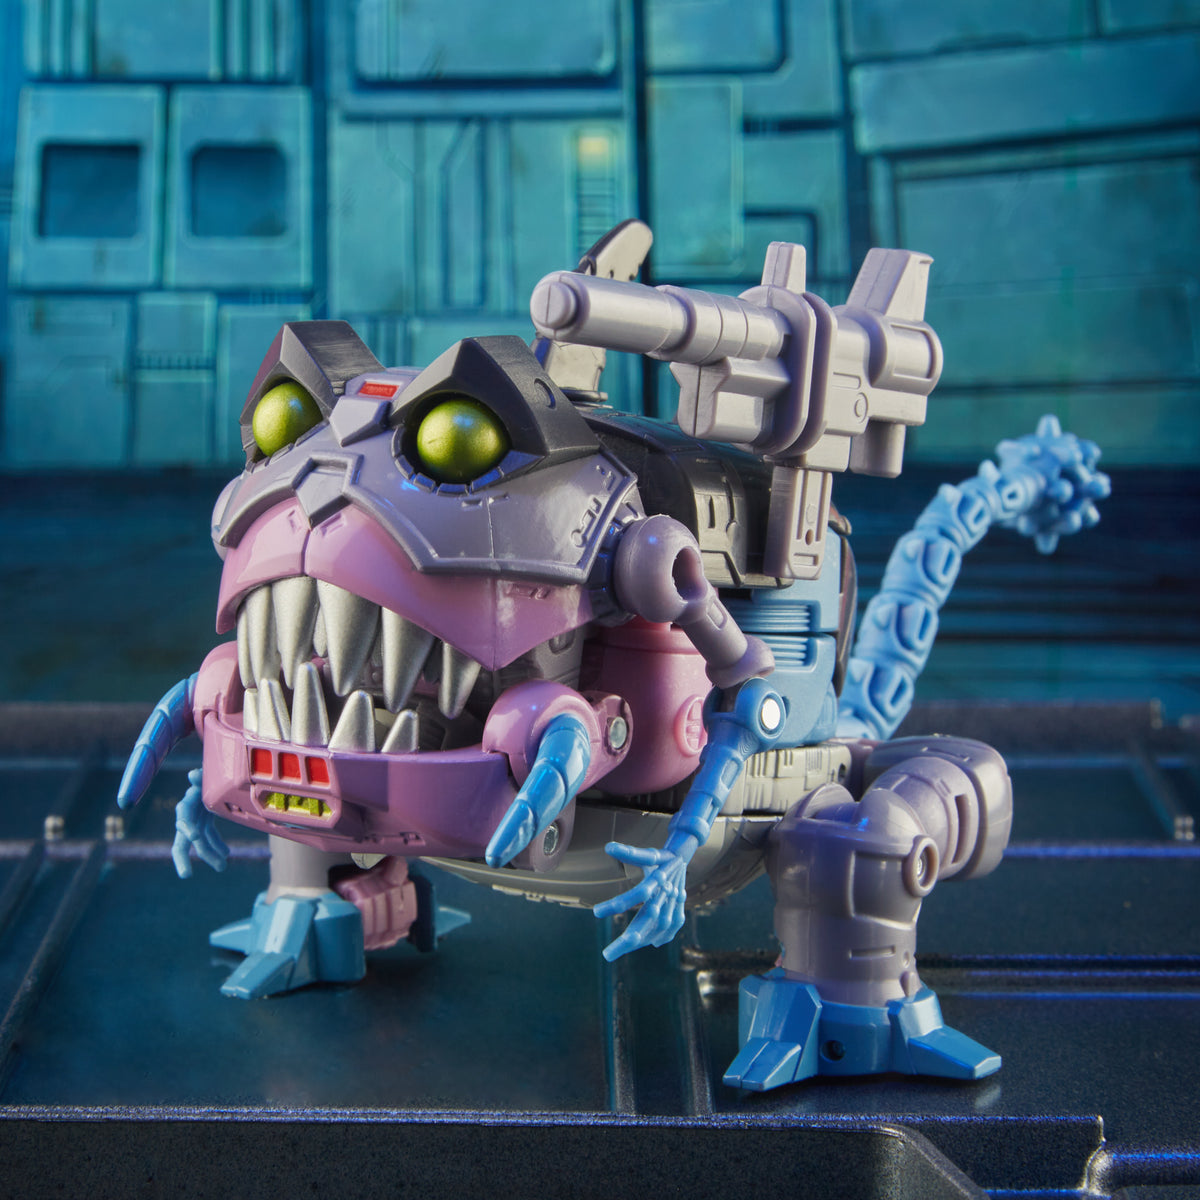 Hasbro - Transformers Generations - Studio Series - The Transformers: The Movie - Deluxe - Gnaw